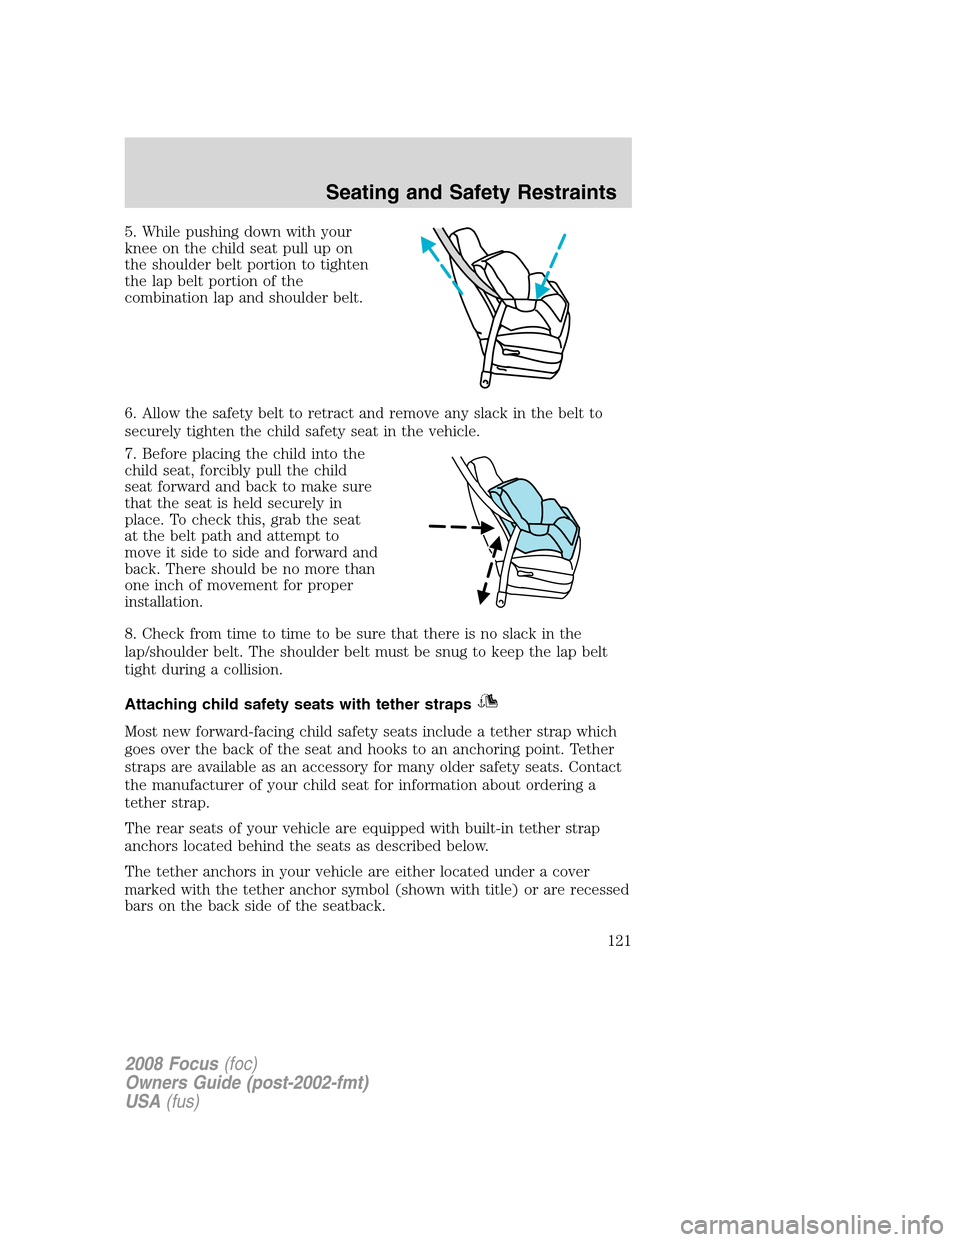 FORD FOCUS 2008 2.G Owners Manual 5. While pushing down with your
knee on the child seat pull up on
the shoulder belt portion to tighten
the lap belt portion of the
combination lap and shoulder belt.
6. Allow the safety belt to retrac